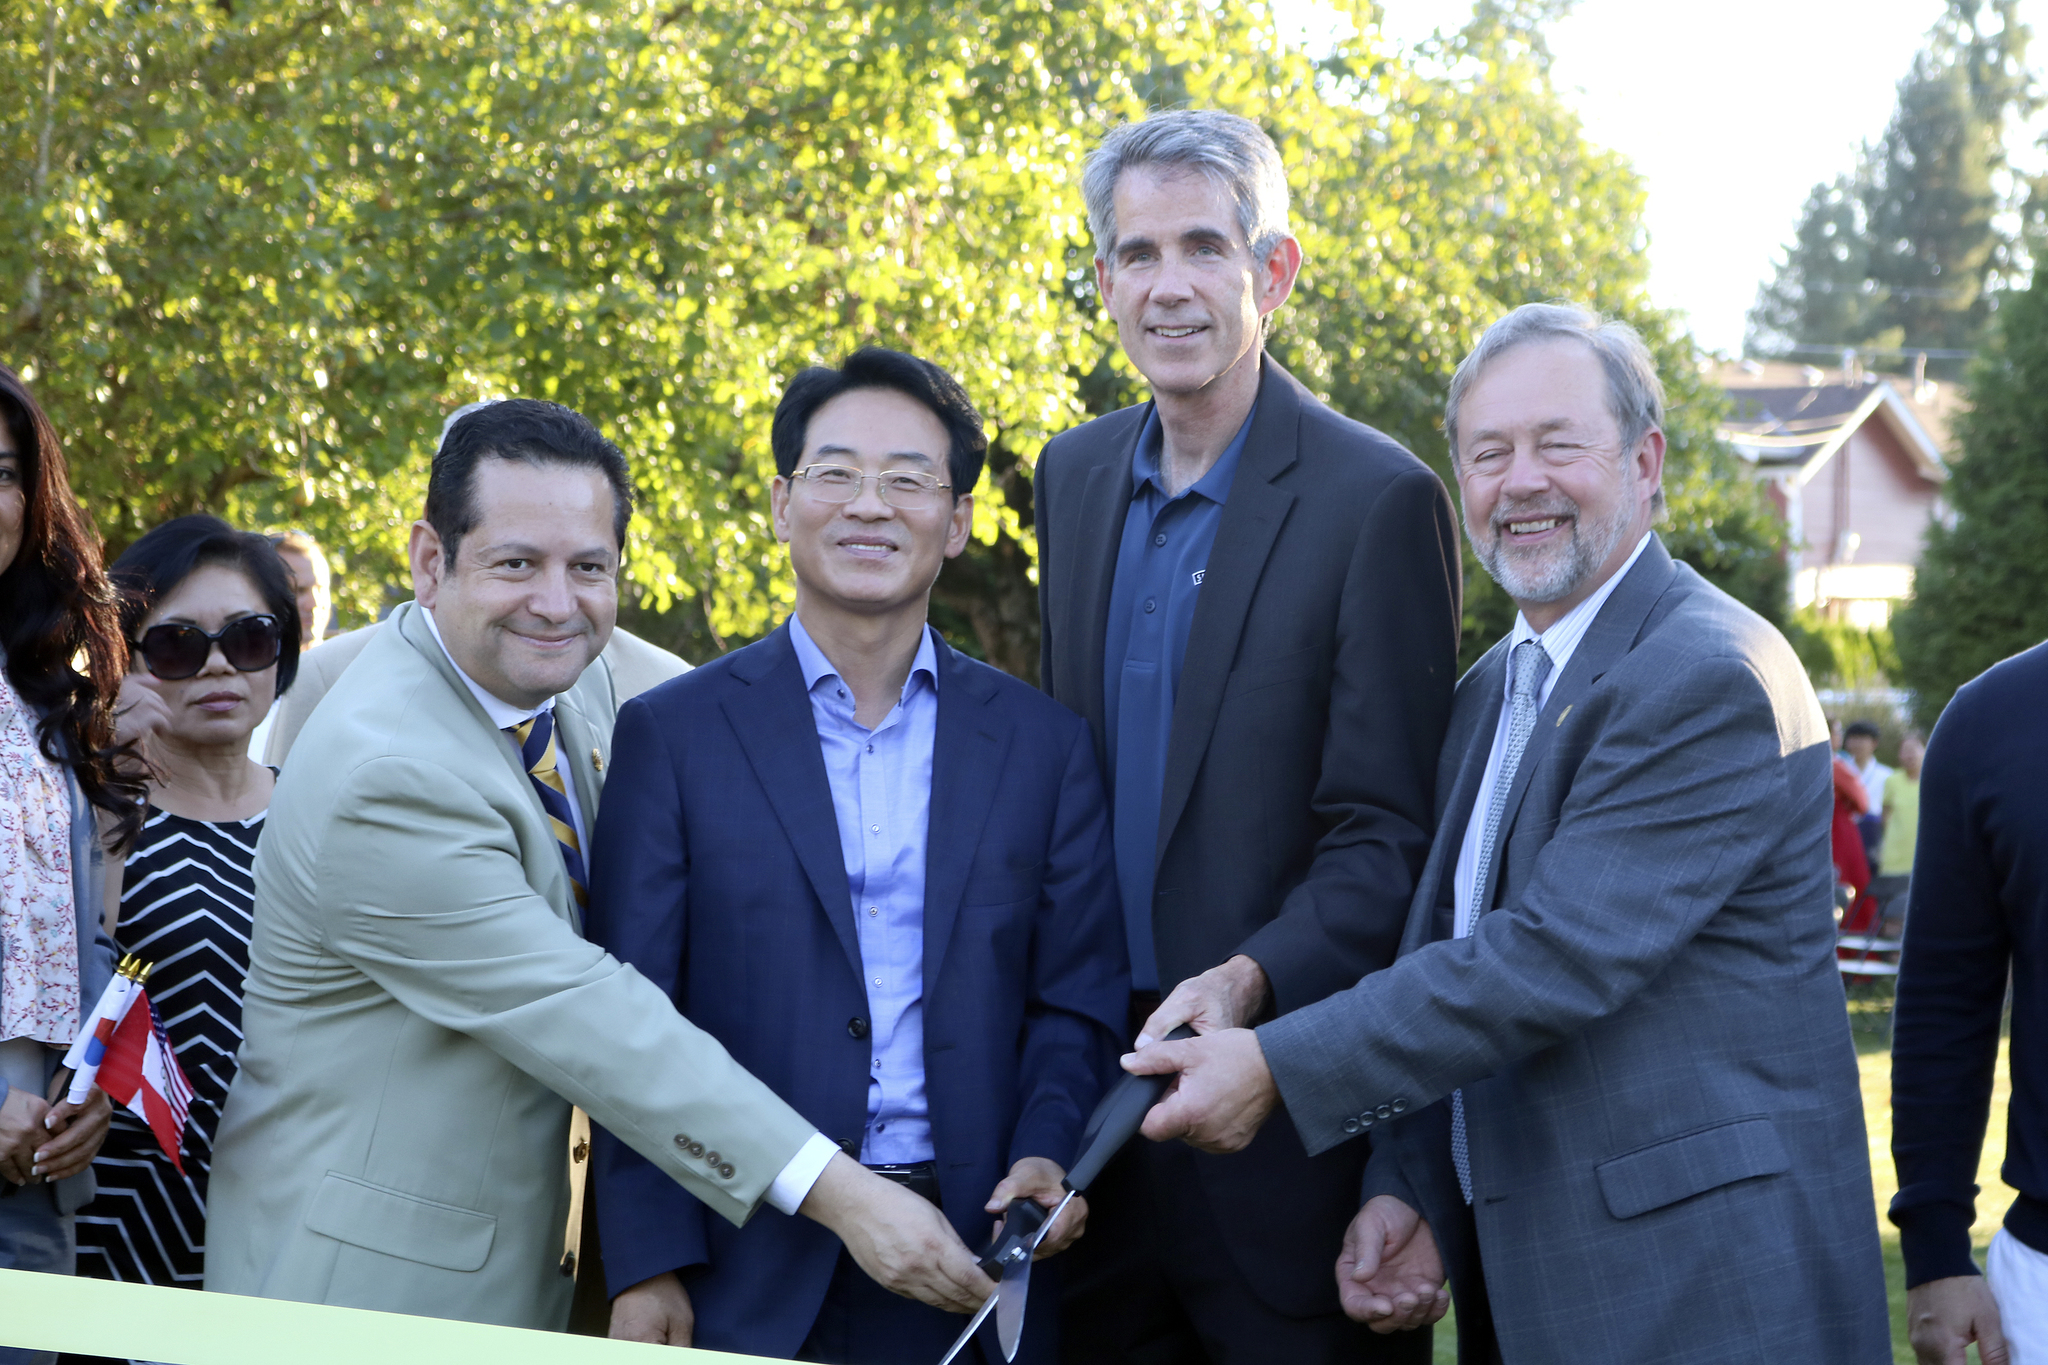 Consul-General Miguel Velasquez of the Consulate of Peru in Seattle and Mayor JuHong Kang from Gangjin, Korea, help Snoqualmie Mayor Matt Larson and North Bend Mayor Ken Hearing officially dedicate Sister Cities Park right next door to Snoqualmie City Hall last summer. Evan Pappas/File Photo